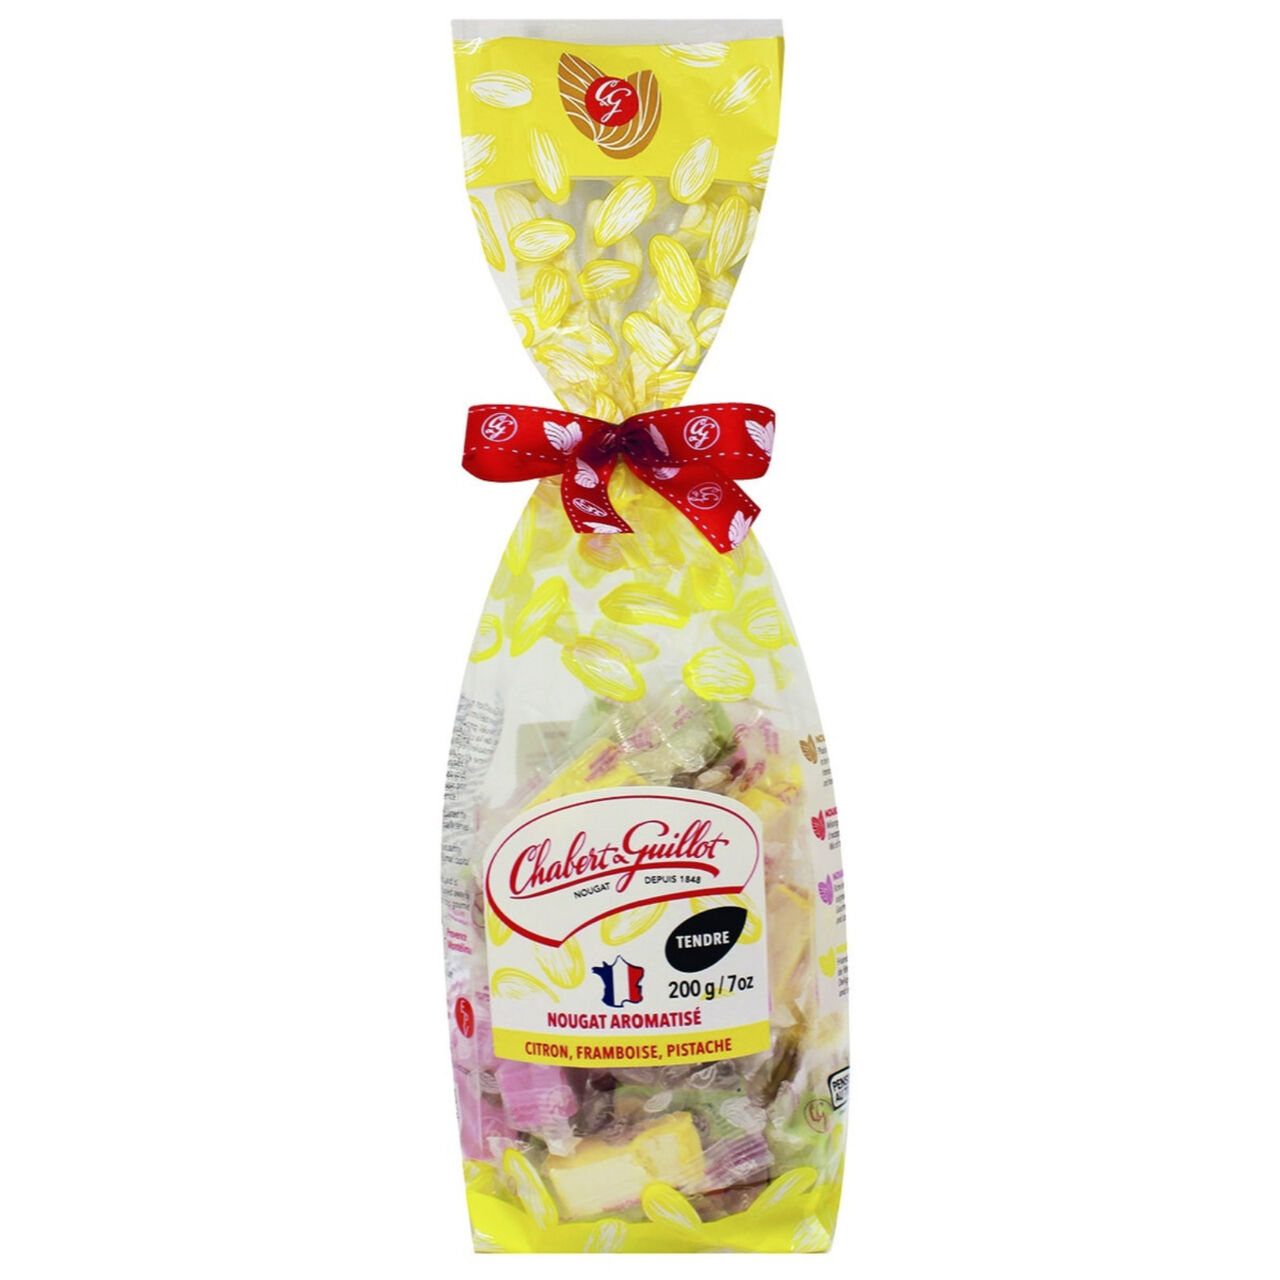 Chabert & Guillot Nougat pieces Vanilla, Raspberry, Pistachio in tin 250g, , large image number 0